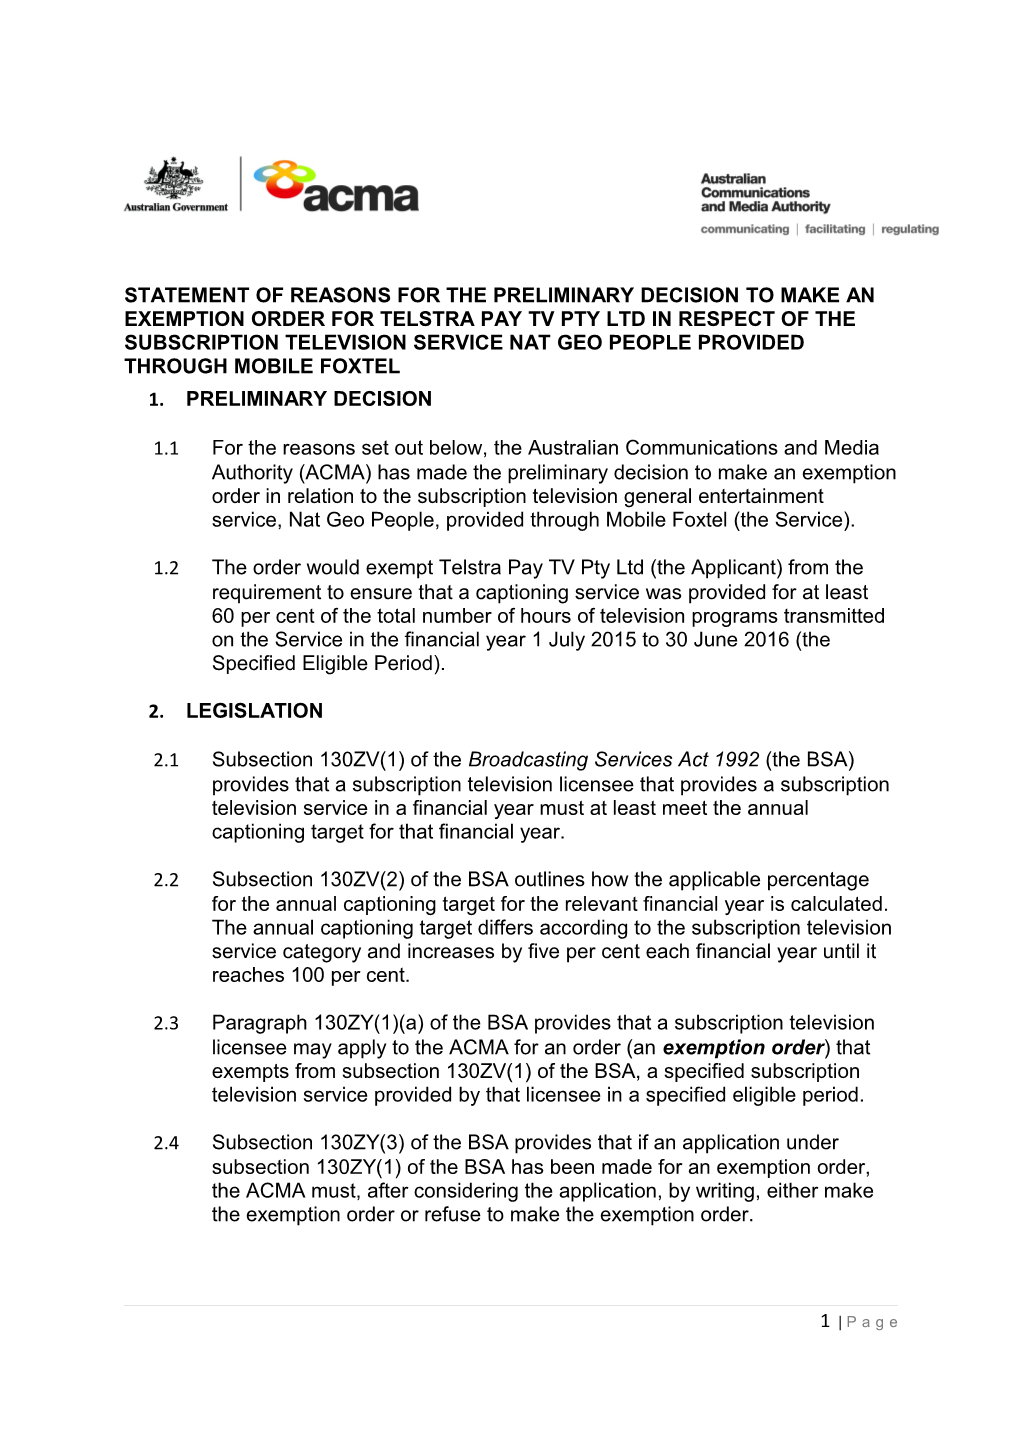 Statement of Reasons for the Preliminary Decision to Make an Exemption Order for Telstra